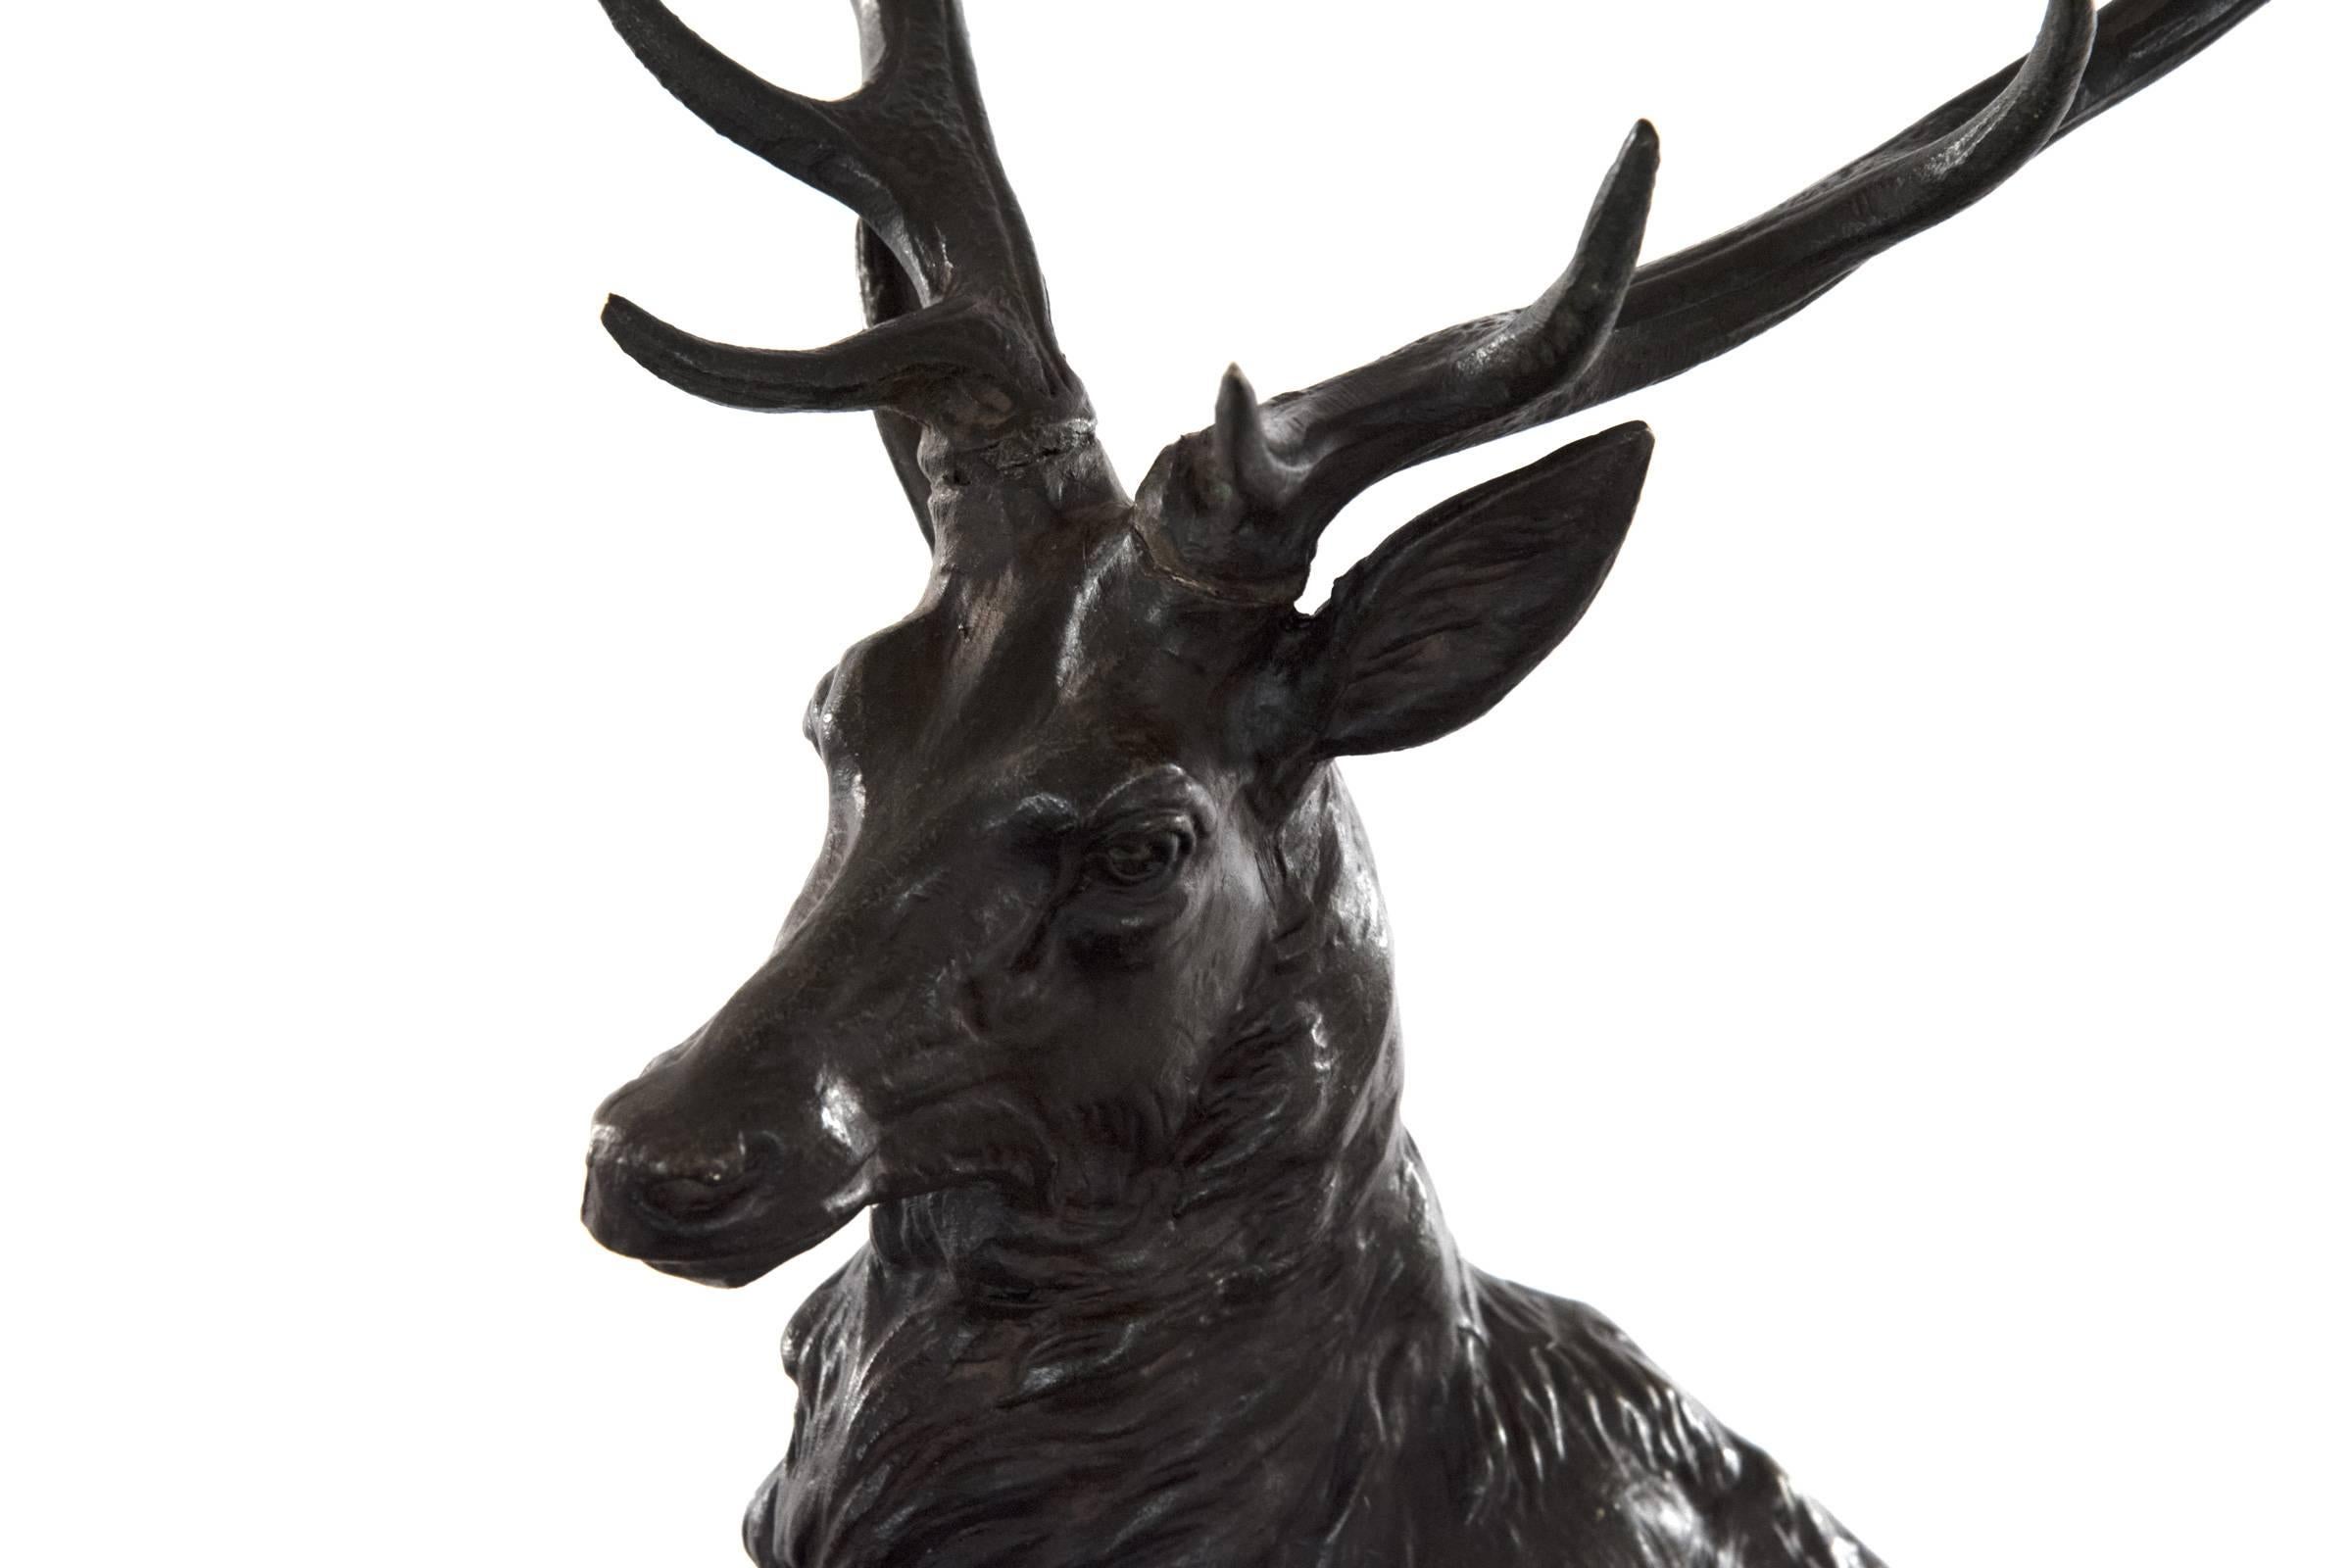 A bronze sculpture of a stag and doe affixed to an illuminating naturalized glass base that is mounted to a variegated black marble plinth. The finely cast animal forms are after French animalier sculptor Louis-Albert Carvin (1875-1951). Measures: